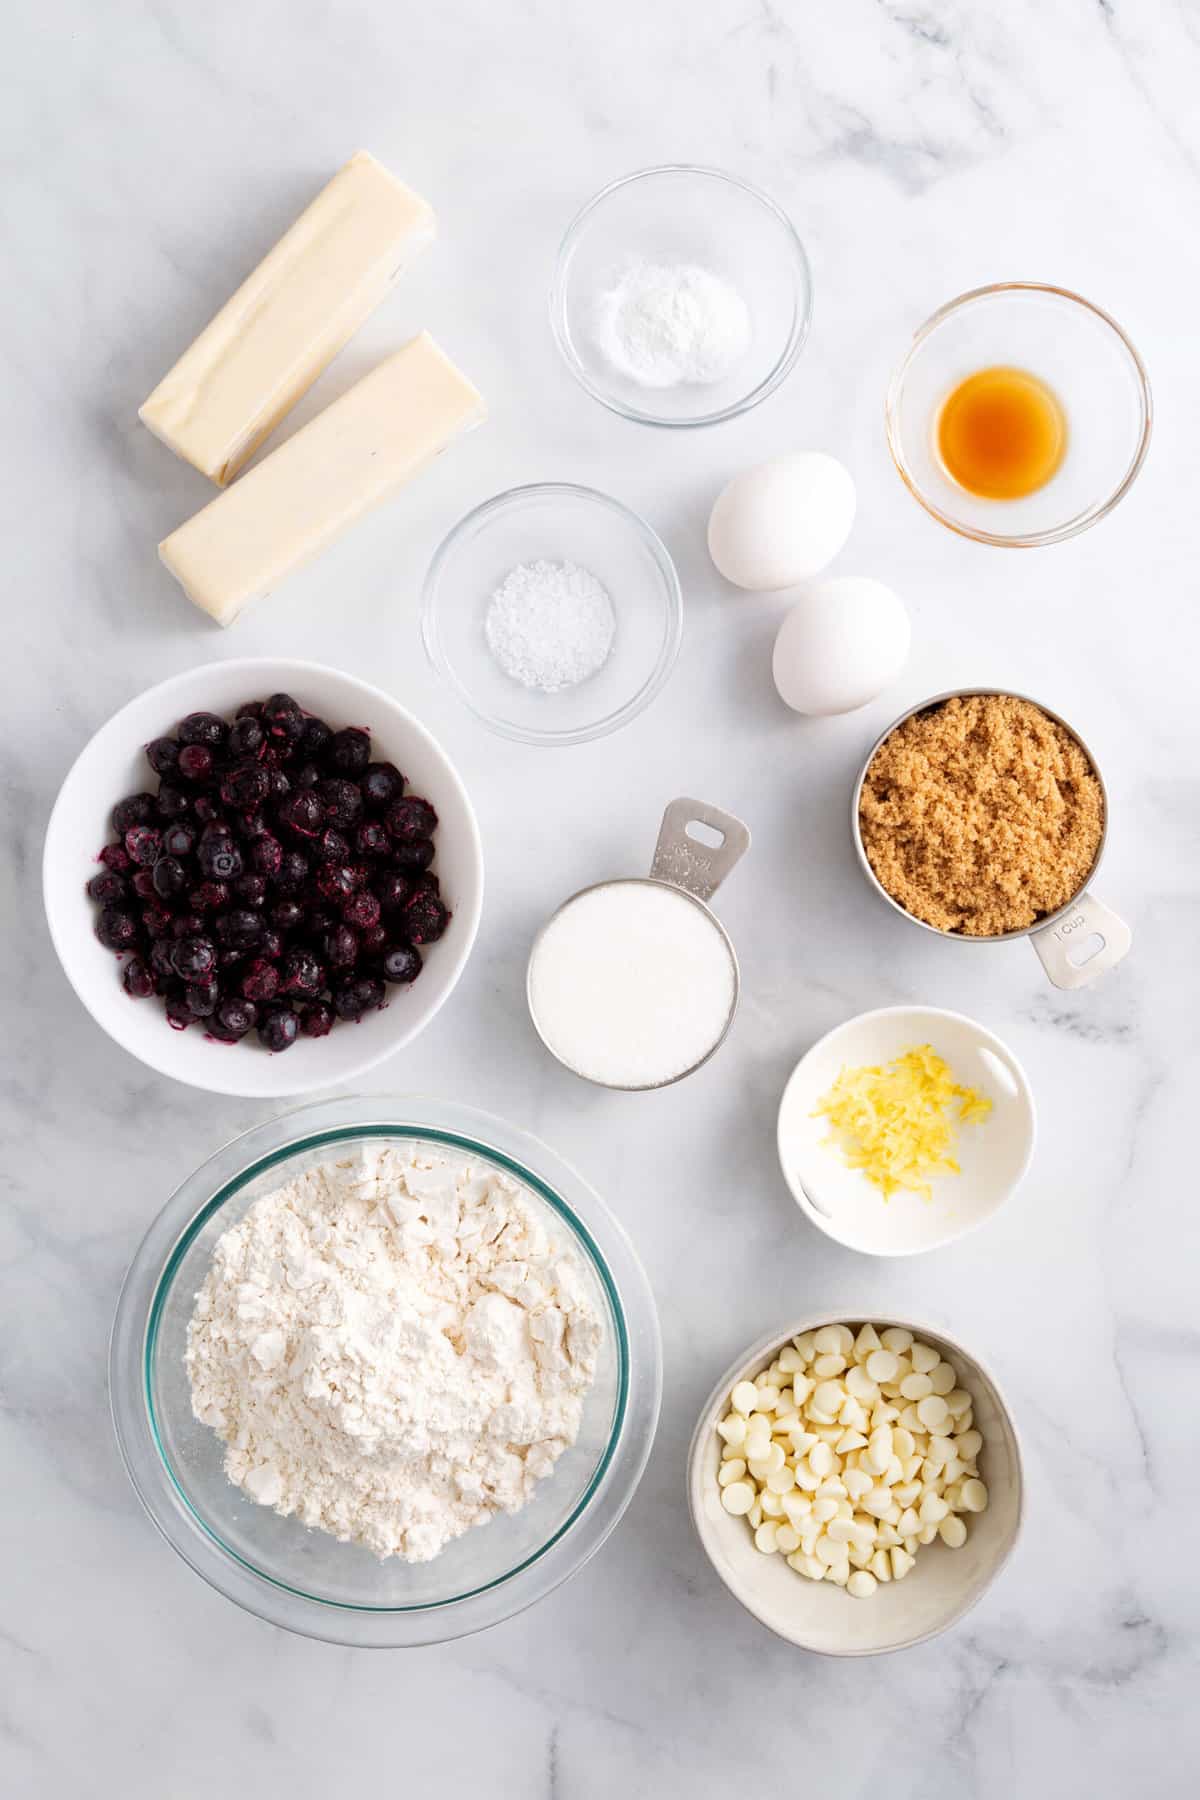 ingredients to make blueberry cookies.